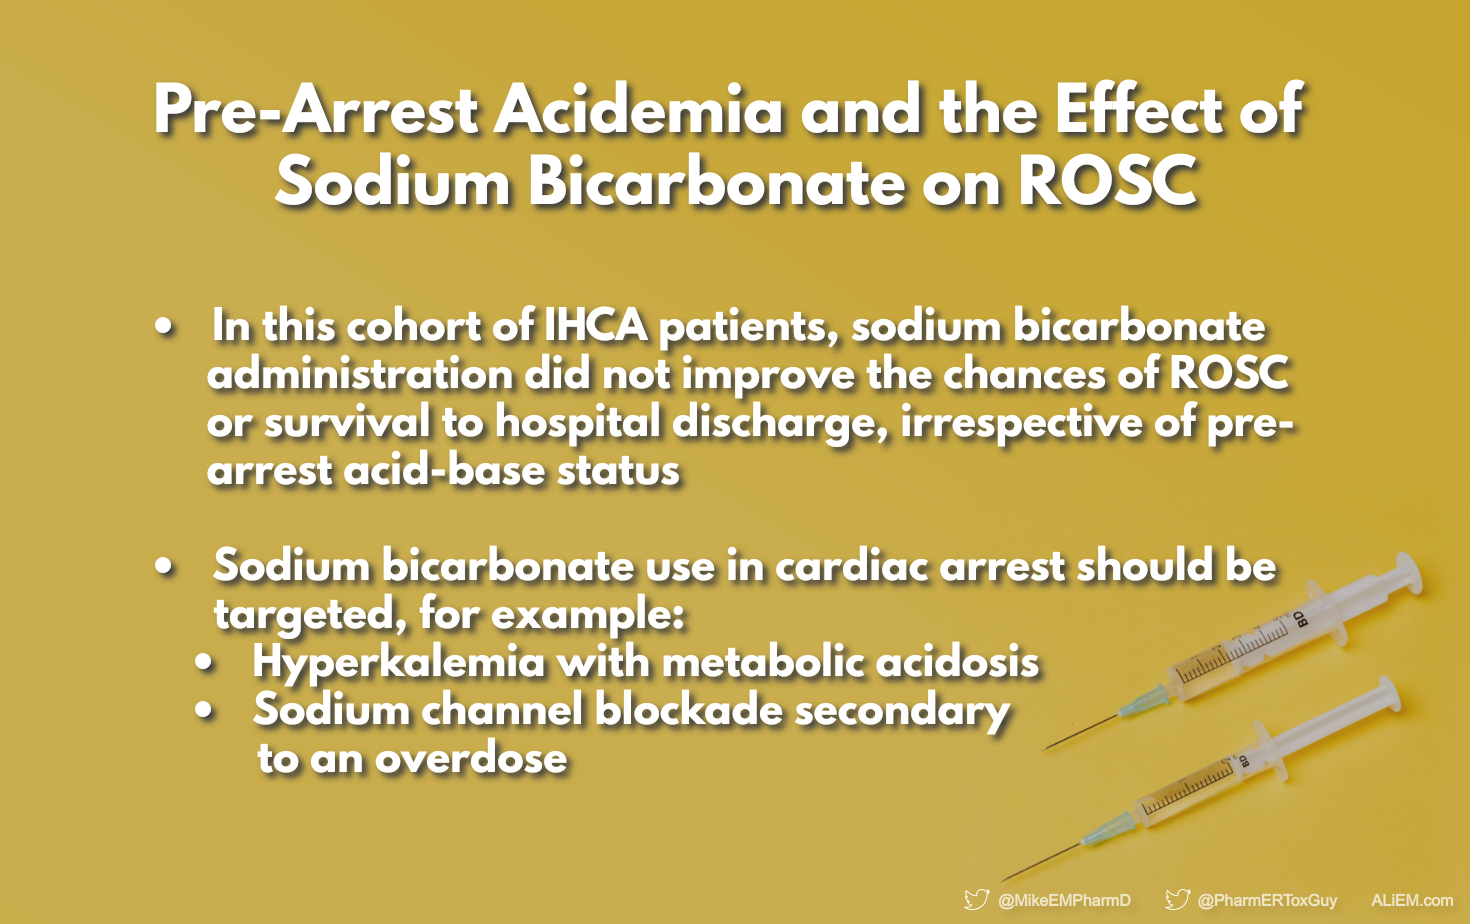 Pre-Arrest Acidemia and the Effect of Sodium Bicarbonate on ROSC